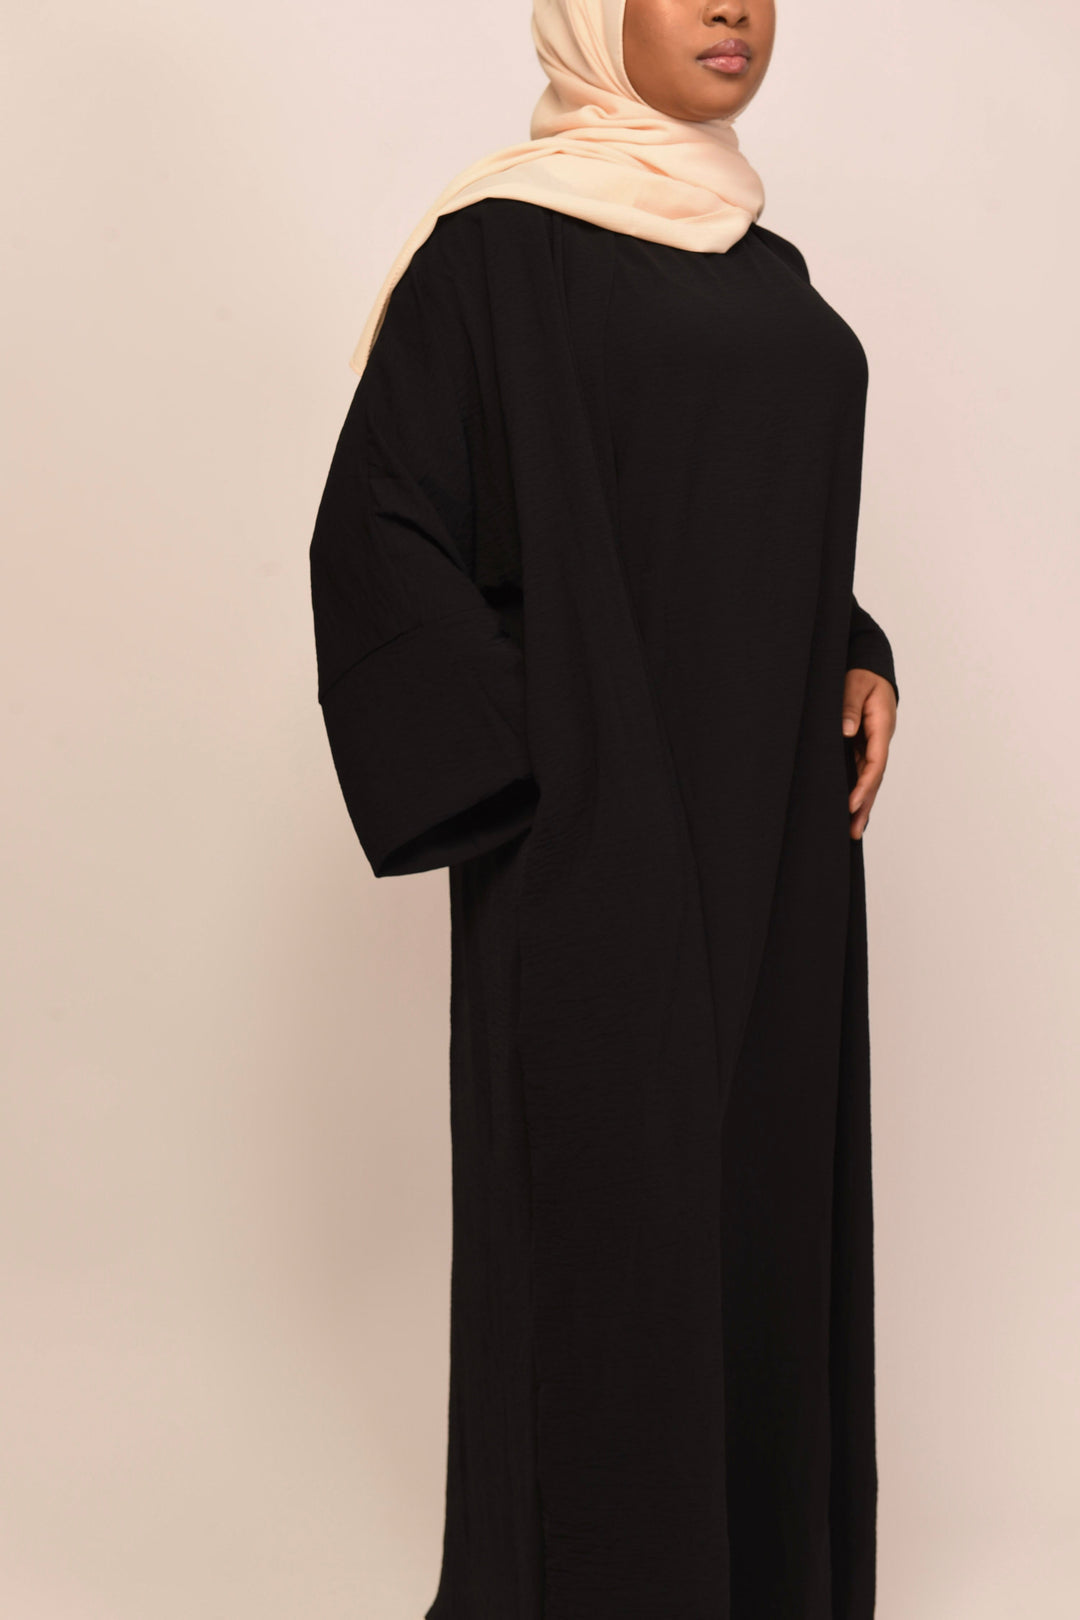 Get trendy with Lea 2-Piece Abaya Set - Black -  available at Voilee NY. Grab yours for $74.90 today!